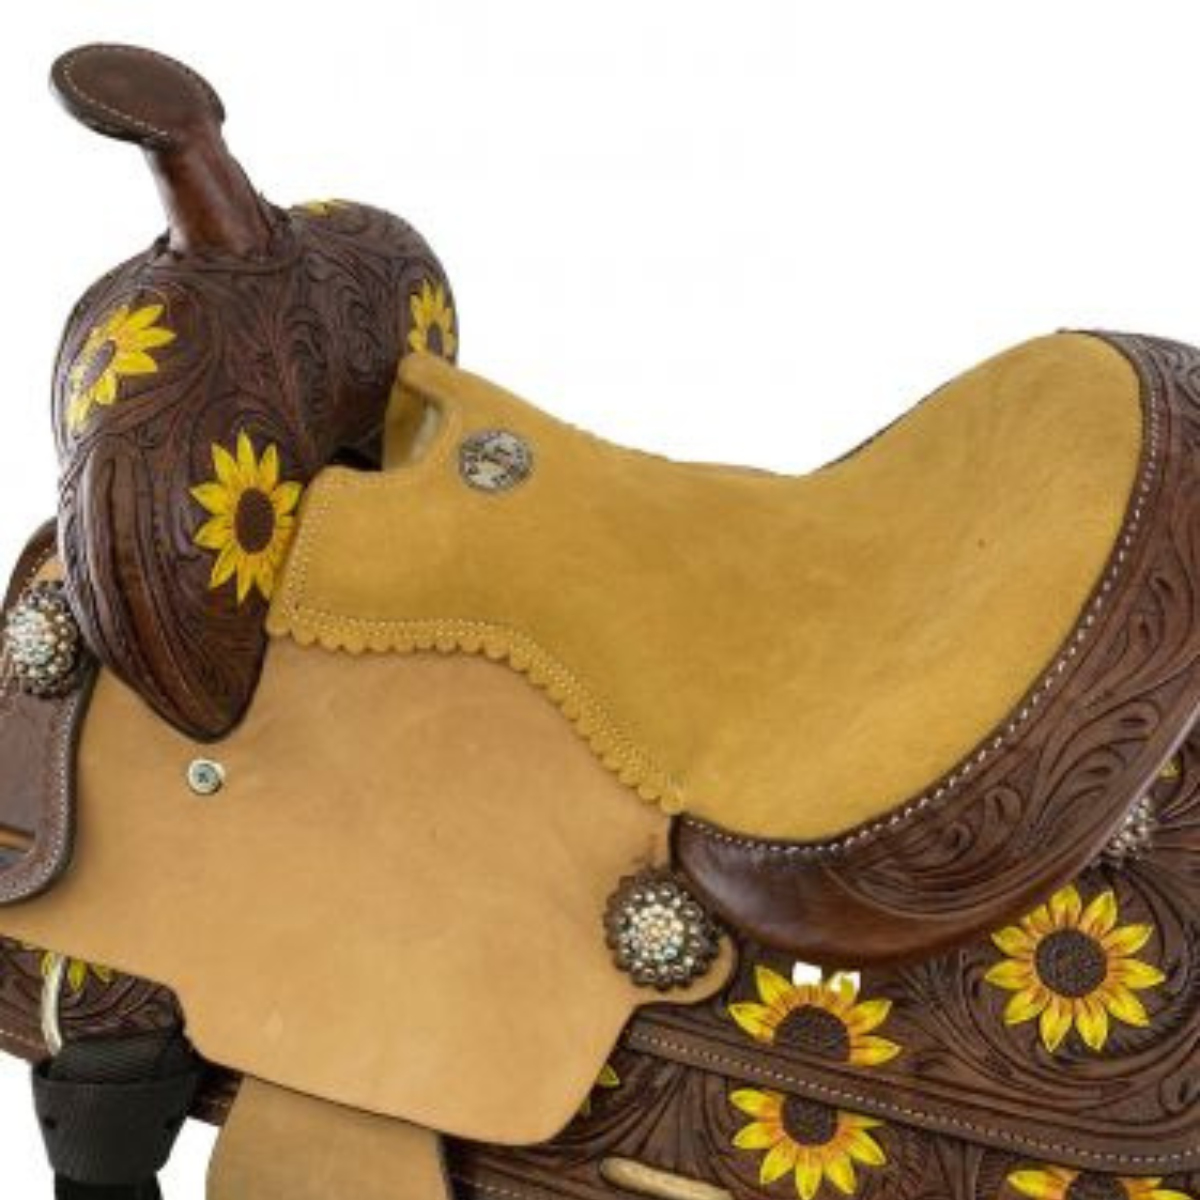 12" DOUBLE T  BARREL STYLE SADDLE WITH HAND PAINTED SUNFLOWER DESIGN COMES COMPLETE WITH M - Double T Saddles